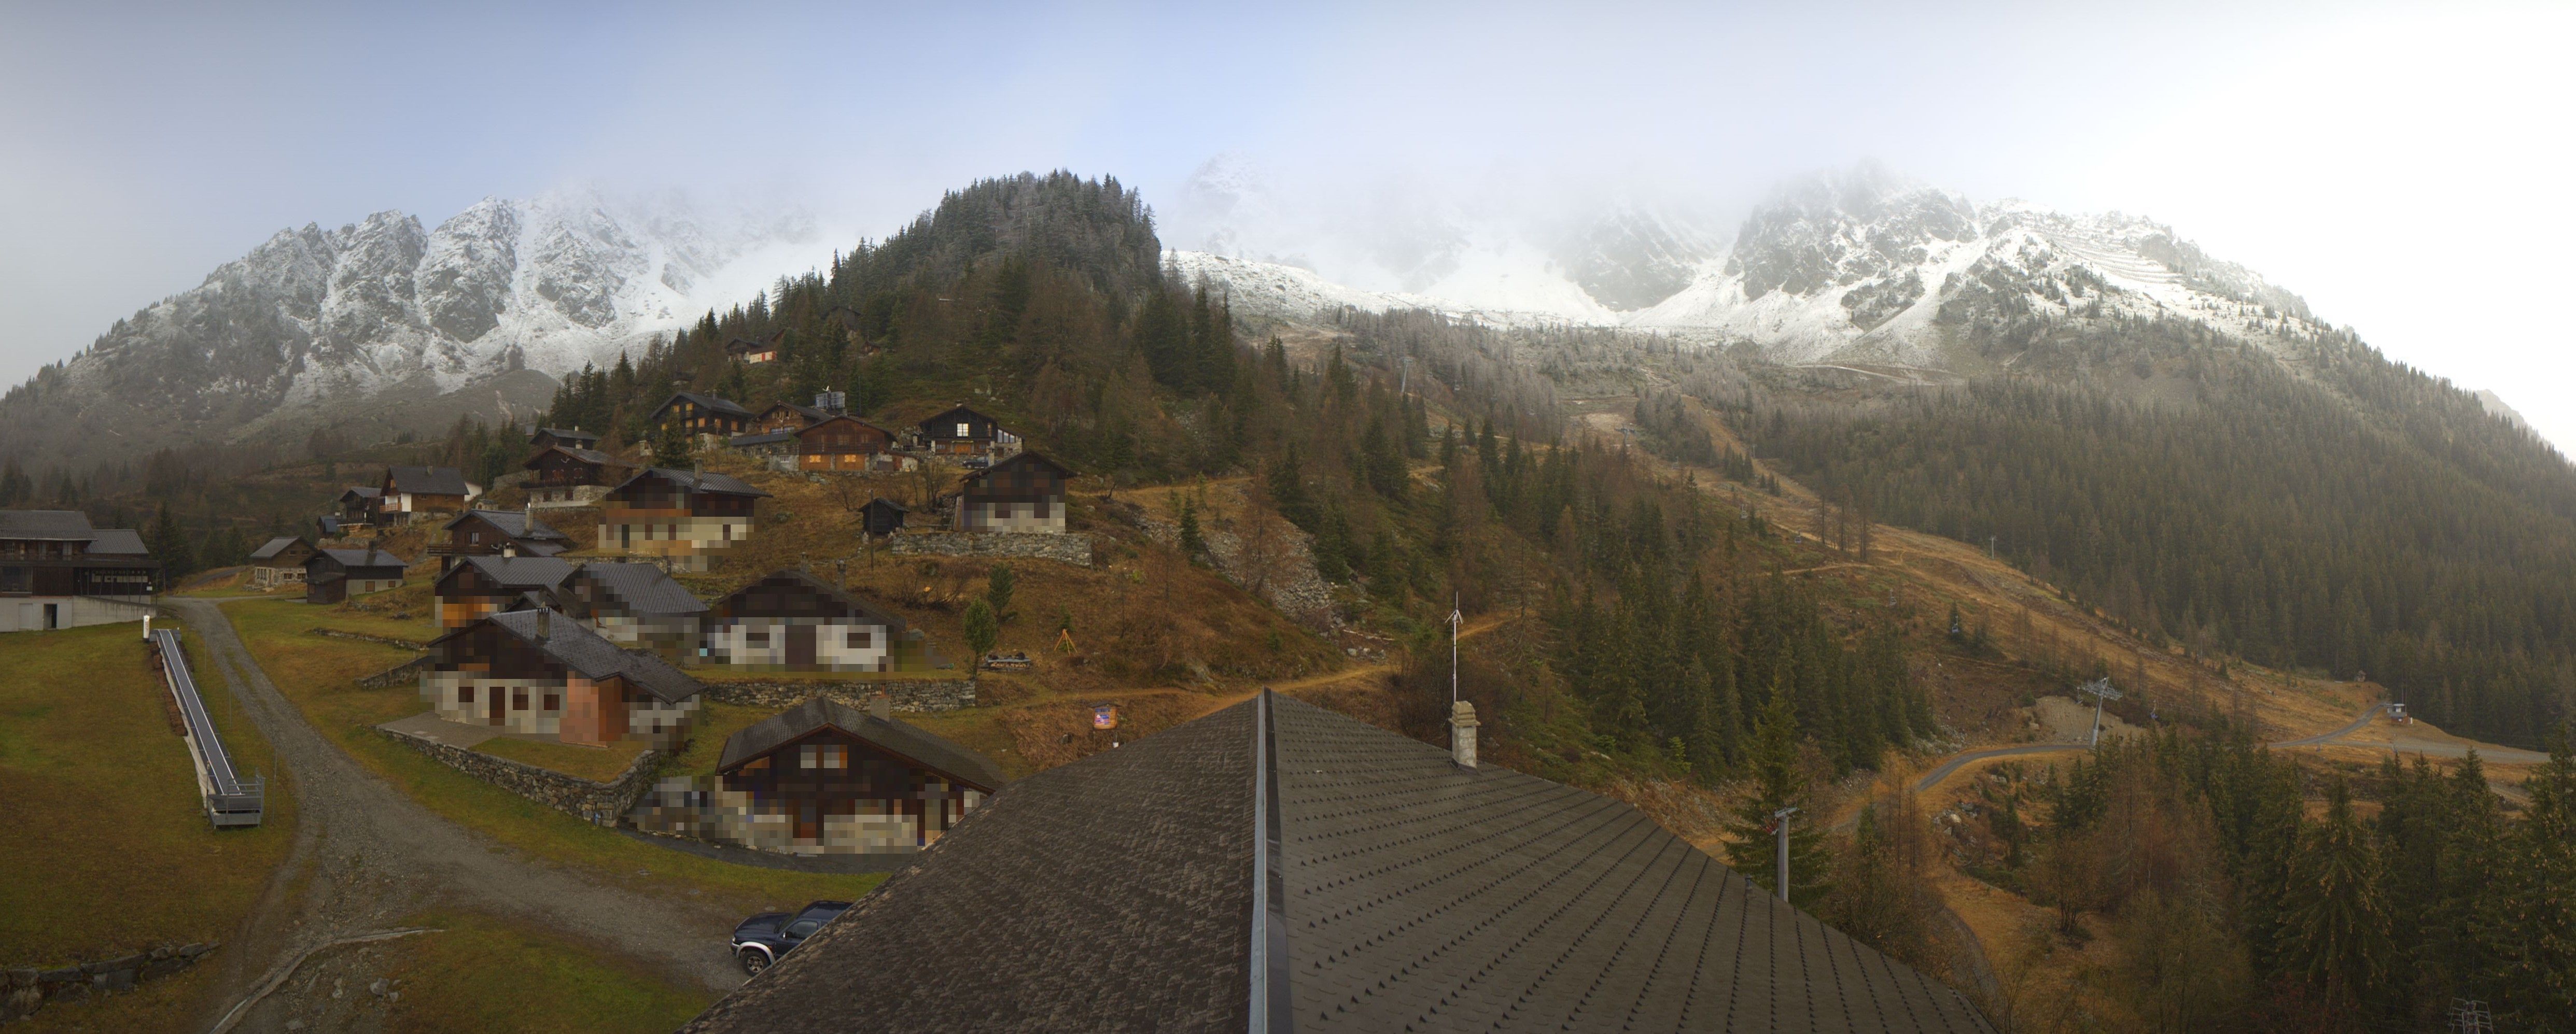 The snow line here in Les Marécottes is about 1900 meters